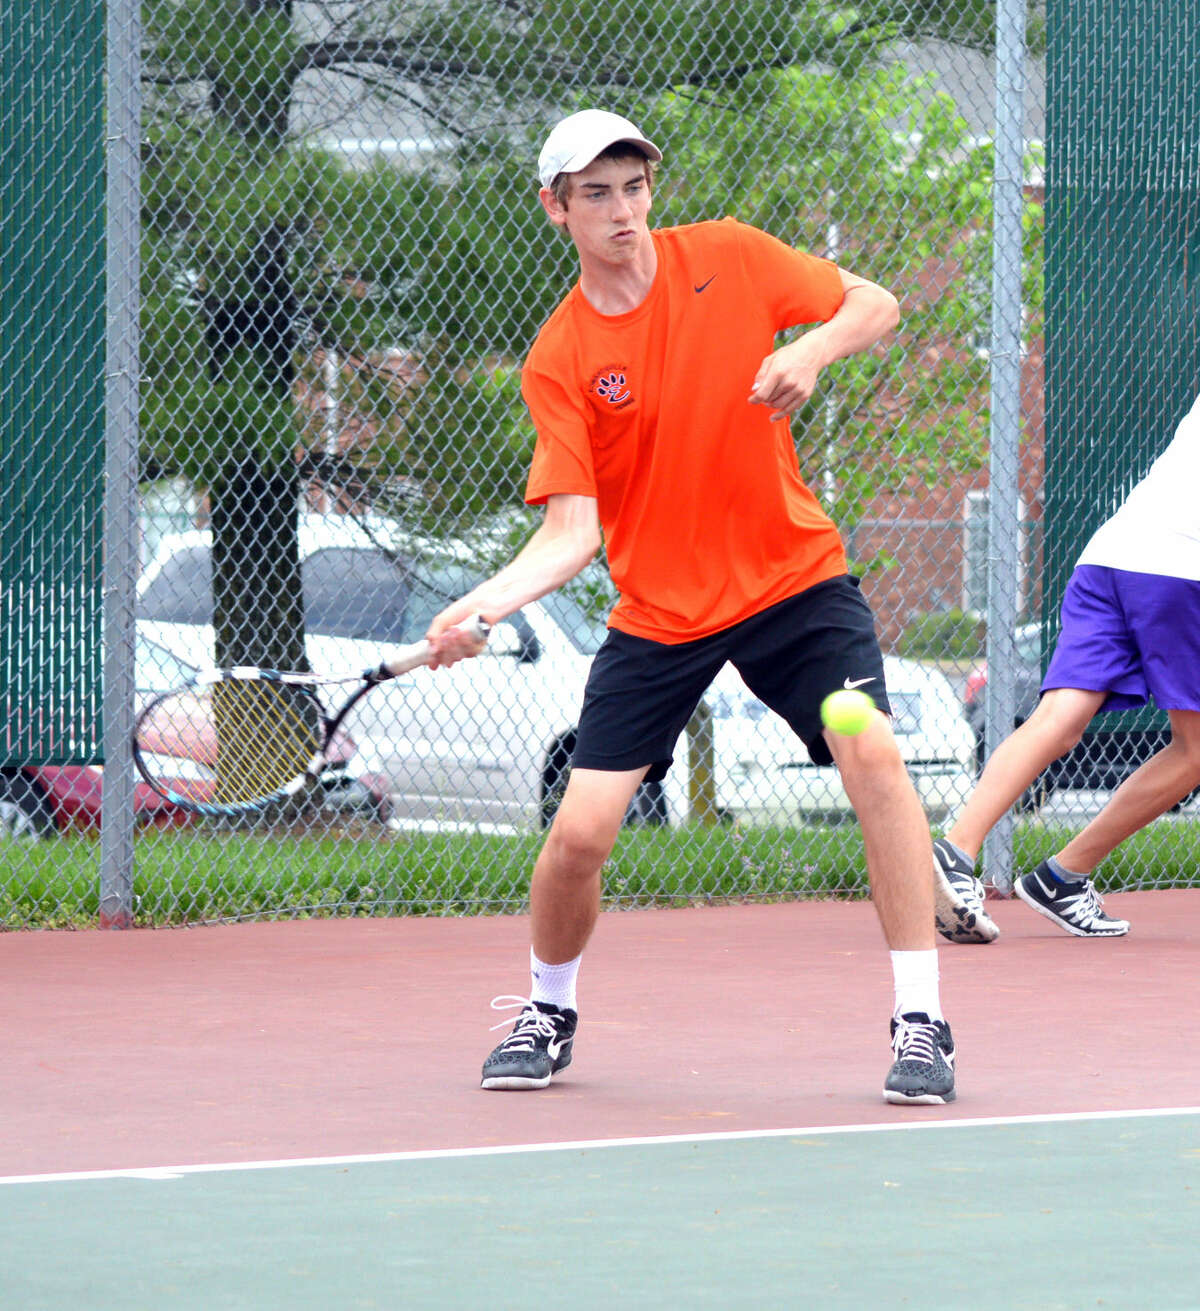 Edwardsville’s Dan Thomas prepares to hit a forehand during his No. 3 doubles match against Collinsville Thursday at the EHS Tennis Center.